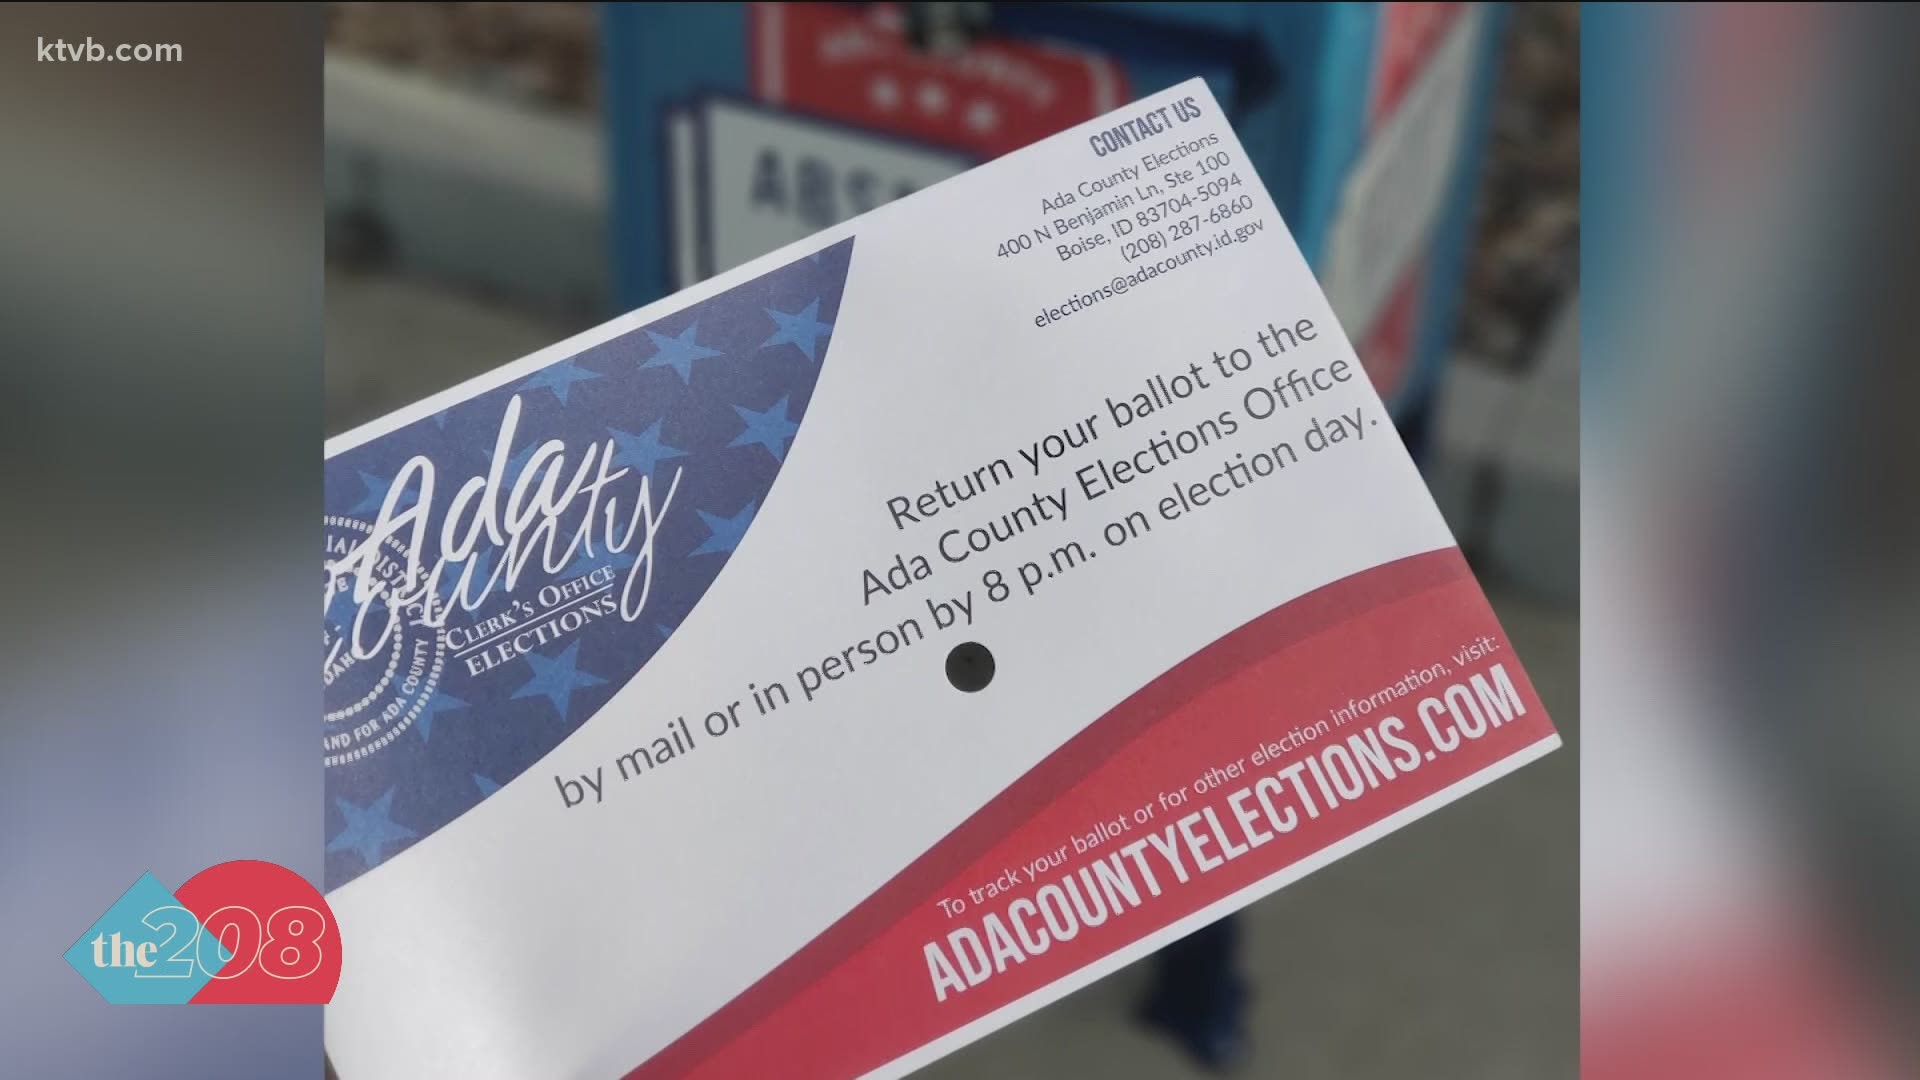 We wanted to find out some of the common reasons that Idaho ballots are kicked out.